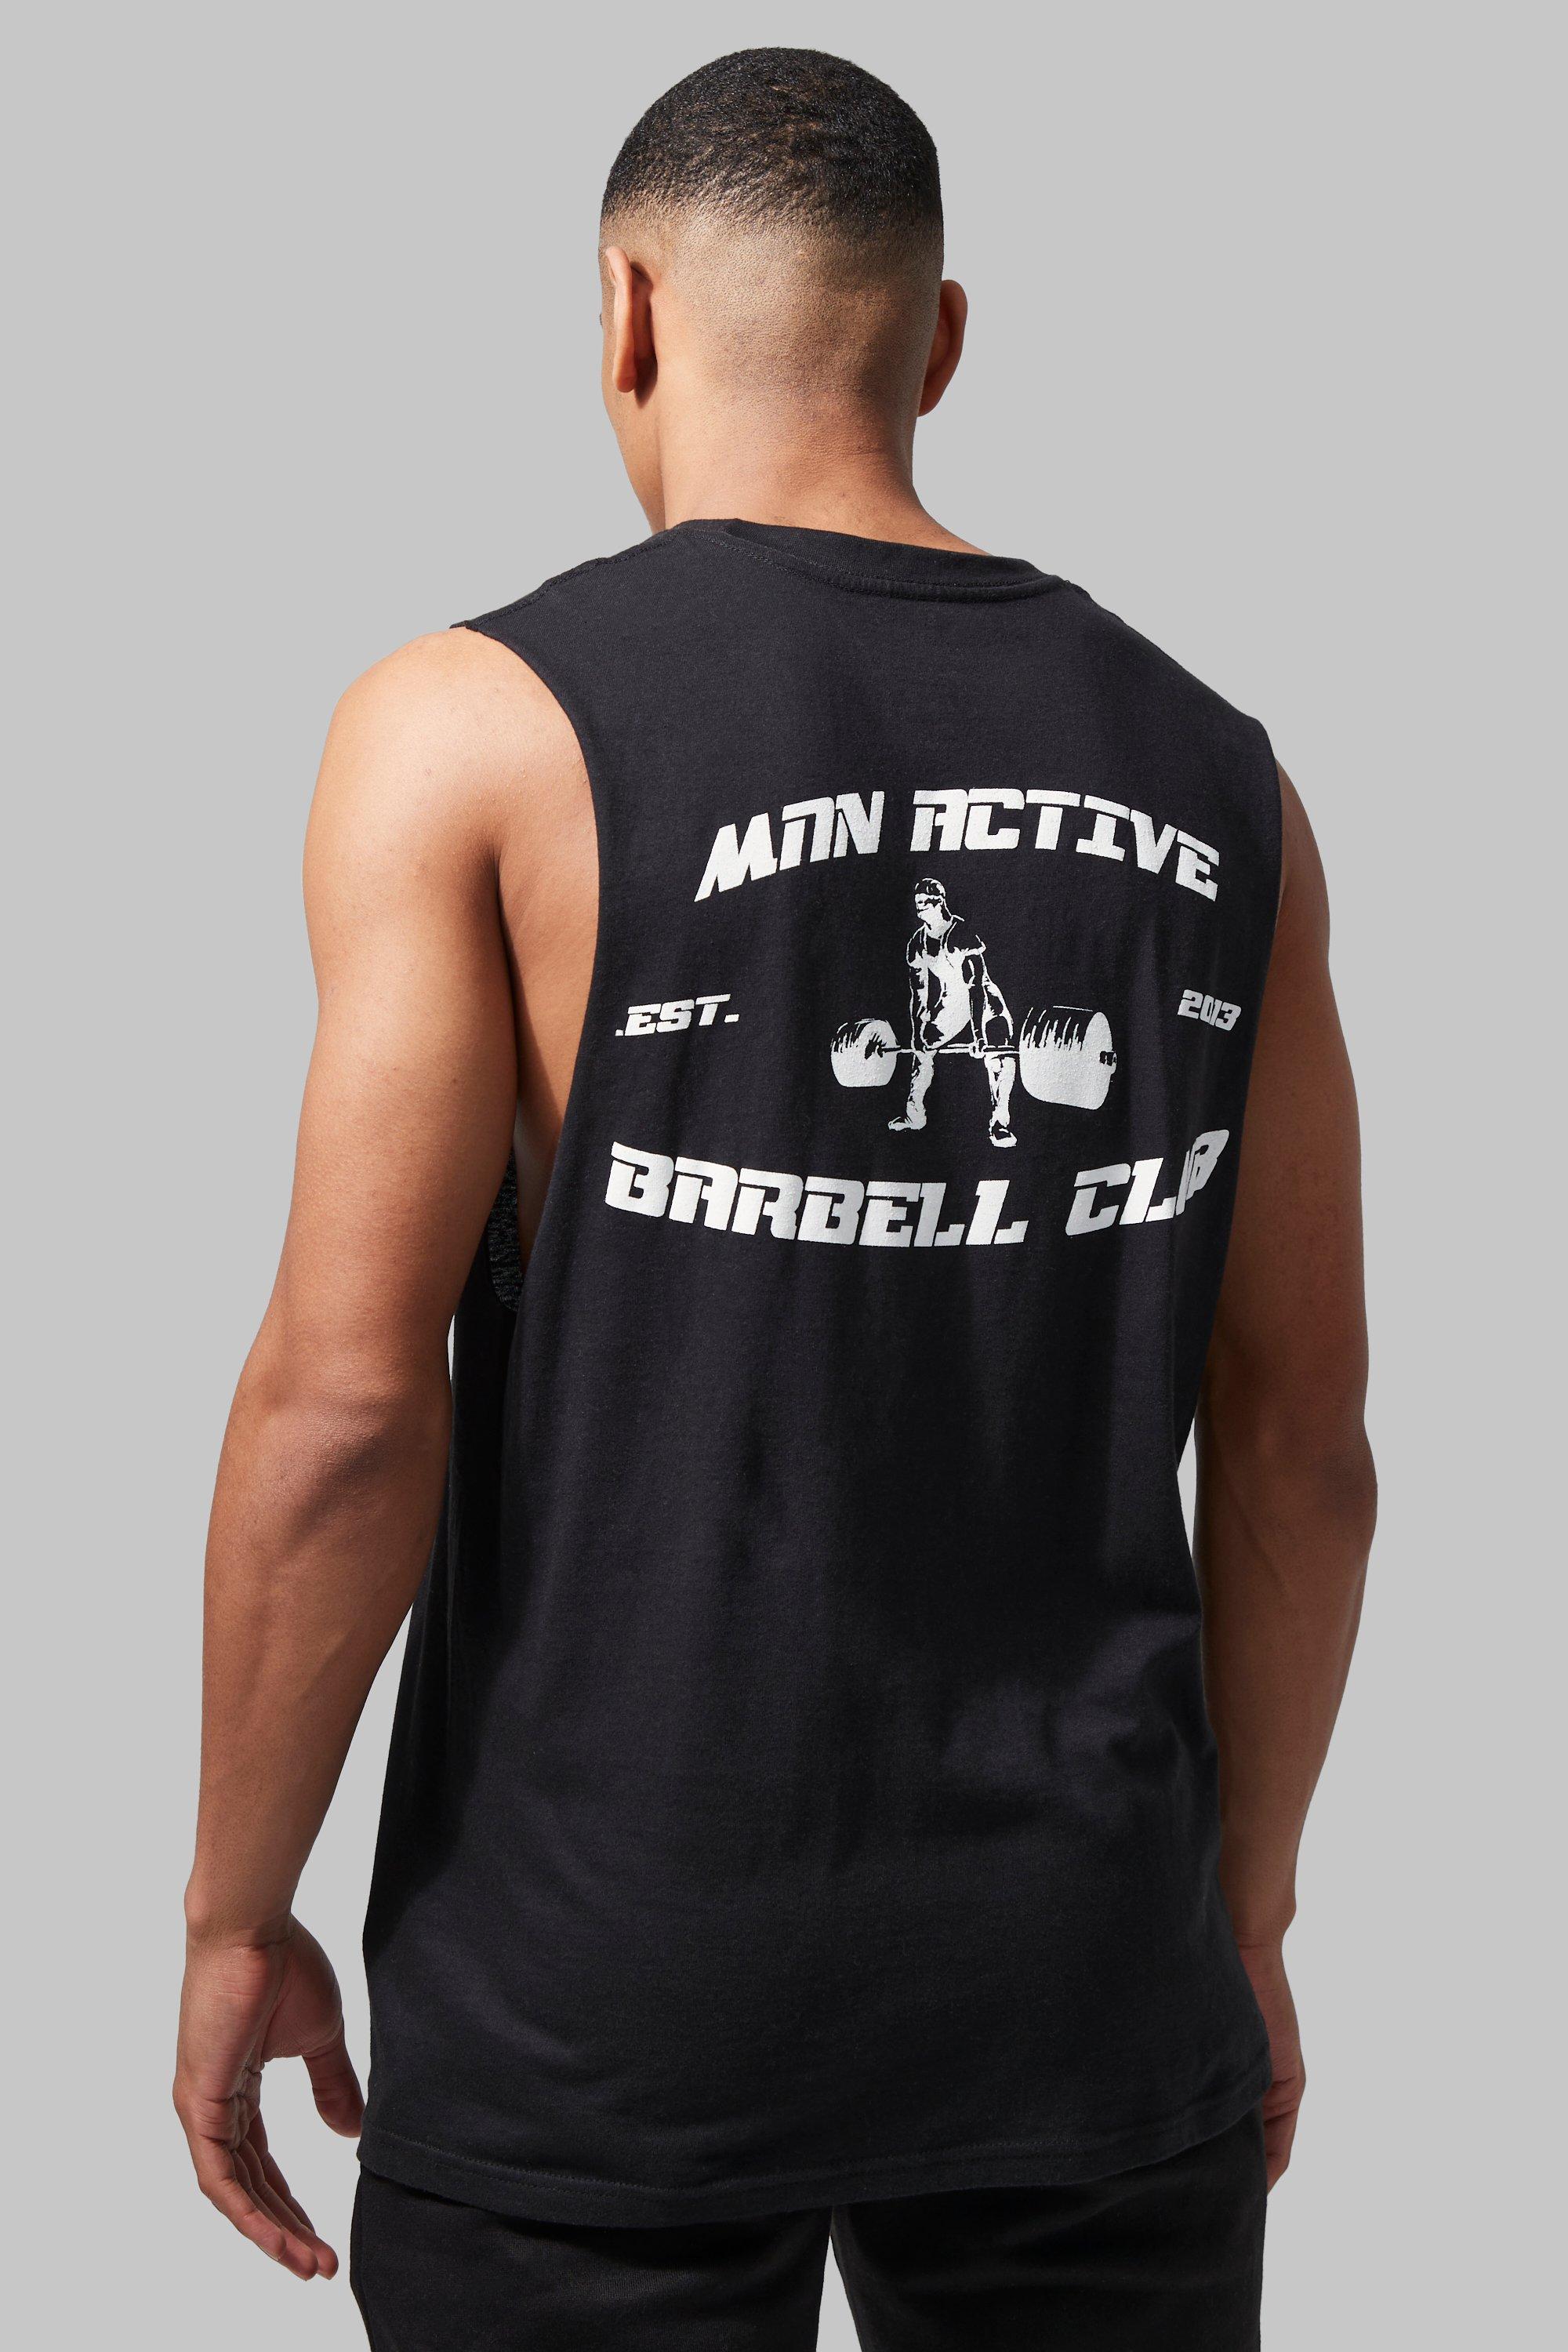 boohooMAN Man Active Gym Oversized Barbell Club T-Shirt